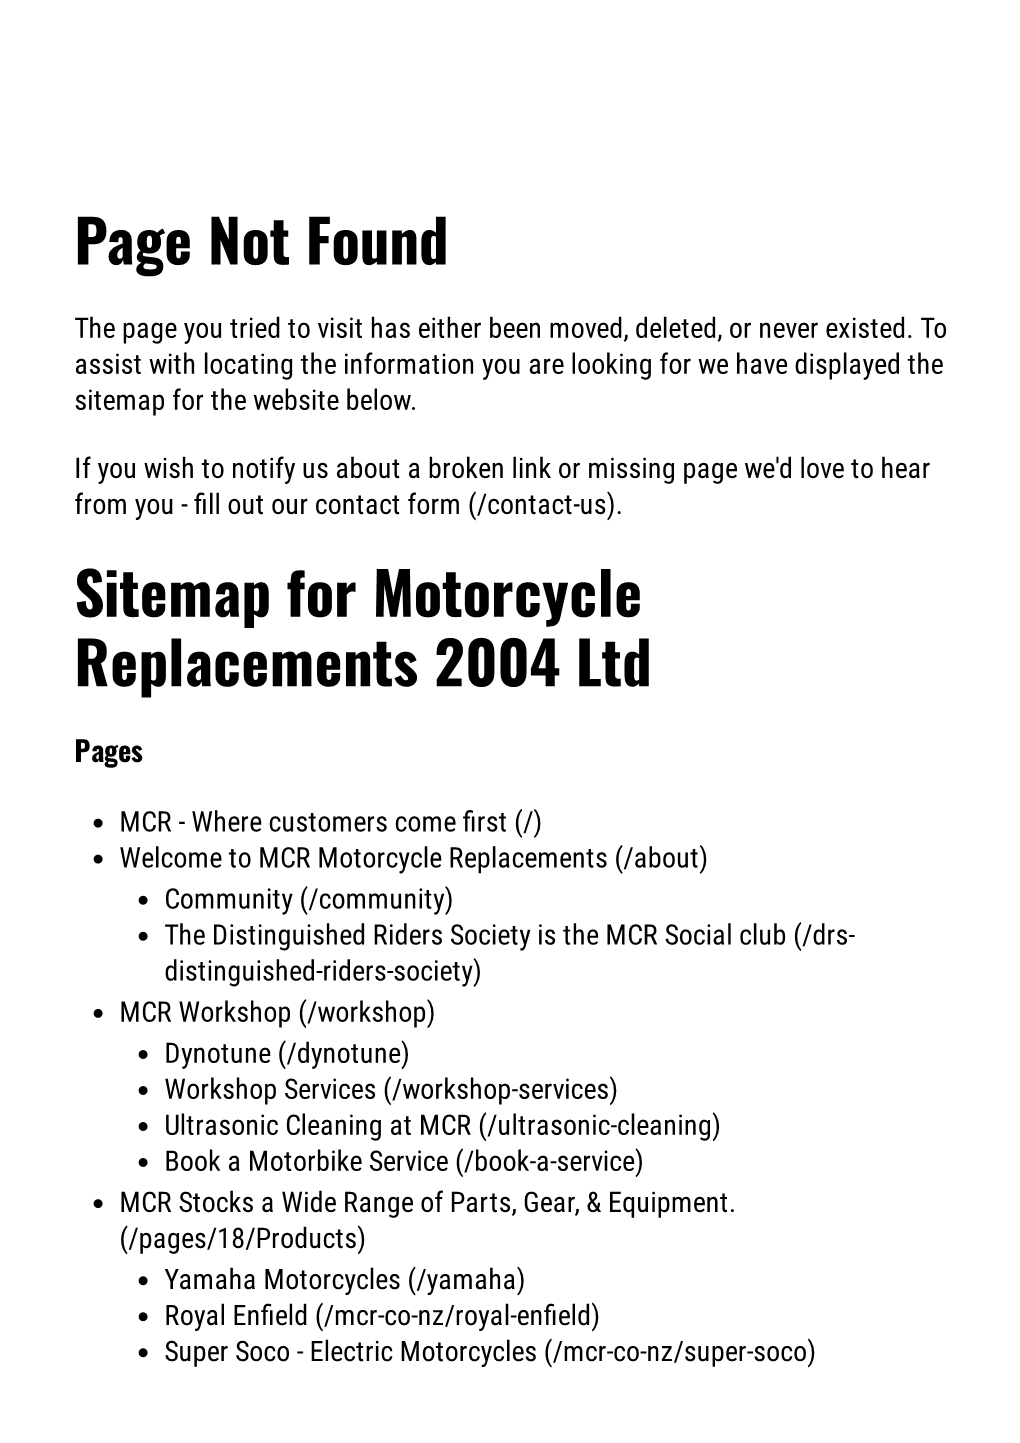 Sitemap for Motorcycle Replacements 2004 Ltd